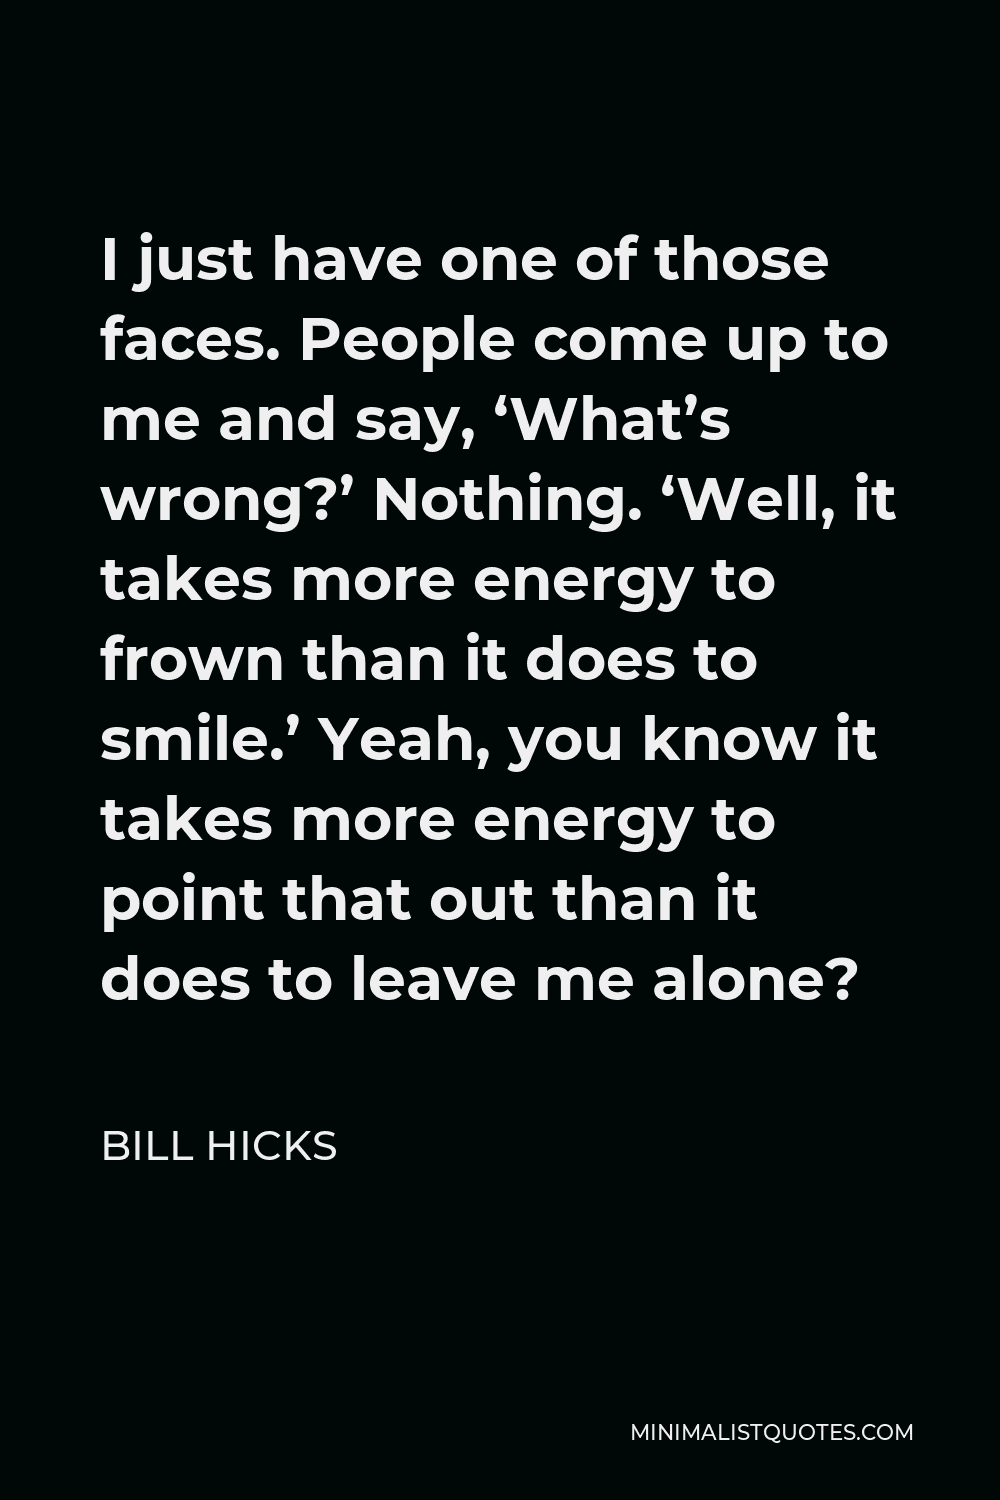 Bill Hicks Quote - I just have one of those faces. People come up to me and say, ‘What’s wrong?’ Nothing. ‘Well, it takes more energy to frown than it does to smile.’ Yeah, you know it takes more energy to point that out than it does to leave me alone?